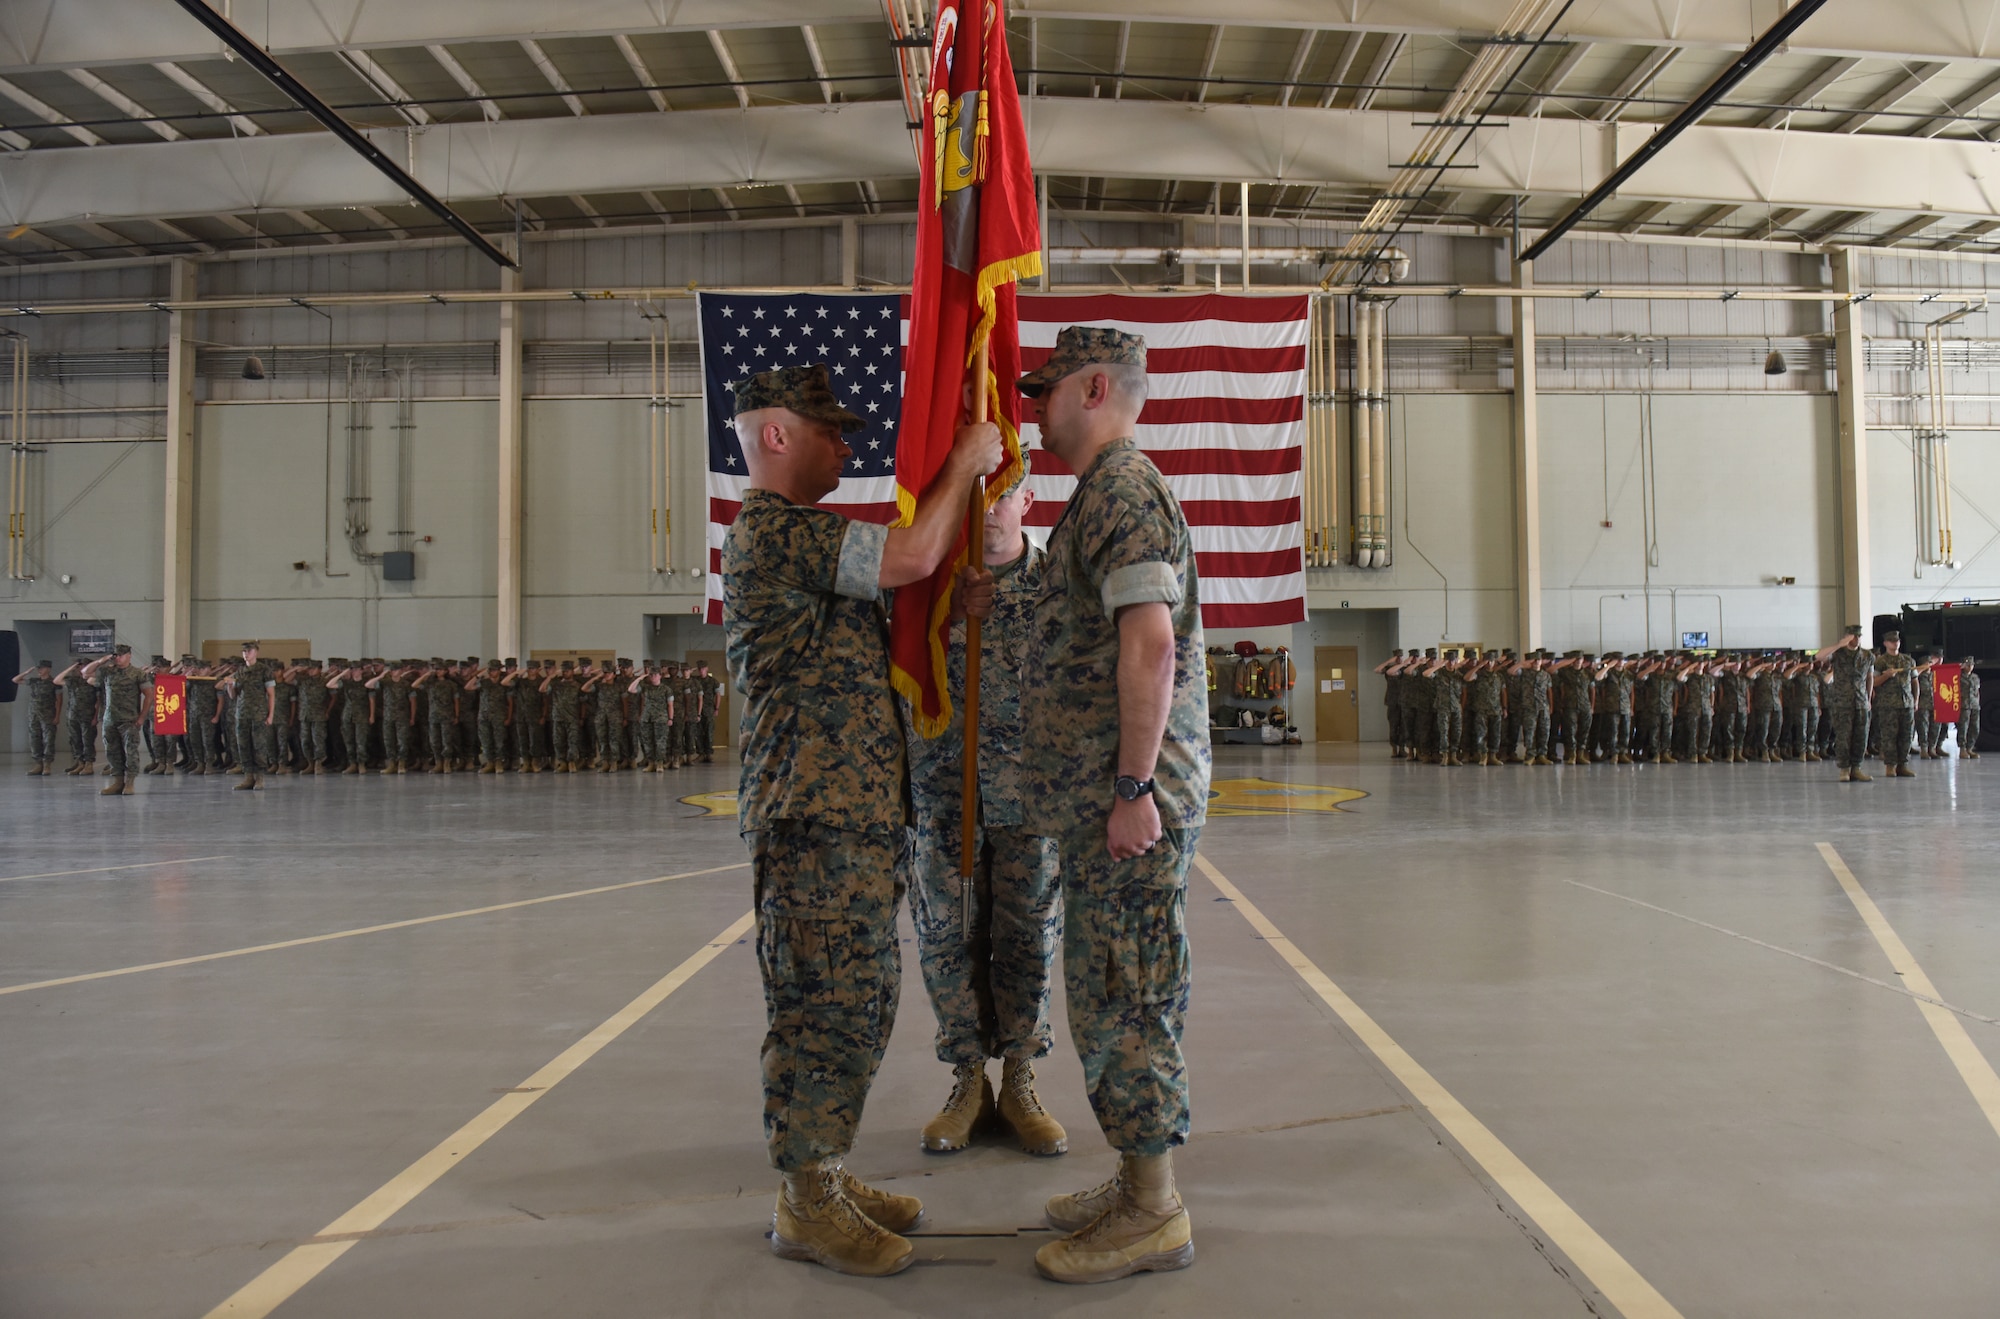 U.S. Marine Corps Lt. Col. Thomas Coyle, left, incoming Marine Corps Detachment commanding officer, receives the Marine flag from Lt. Col. Arturo Derryberry, outgoing MCD commanding officer during the MCD change of command at Goodfellow Air Force Base, Texas, June 24, 2022. The exchanging of the flag physically represents the transfer of responsibility, authority and accountability from outgoing to incoming commanding officer. (U.S. Air Force photo by Airman 1st Class Zachary Heimbuch)